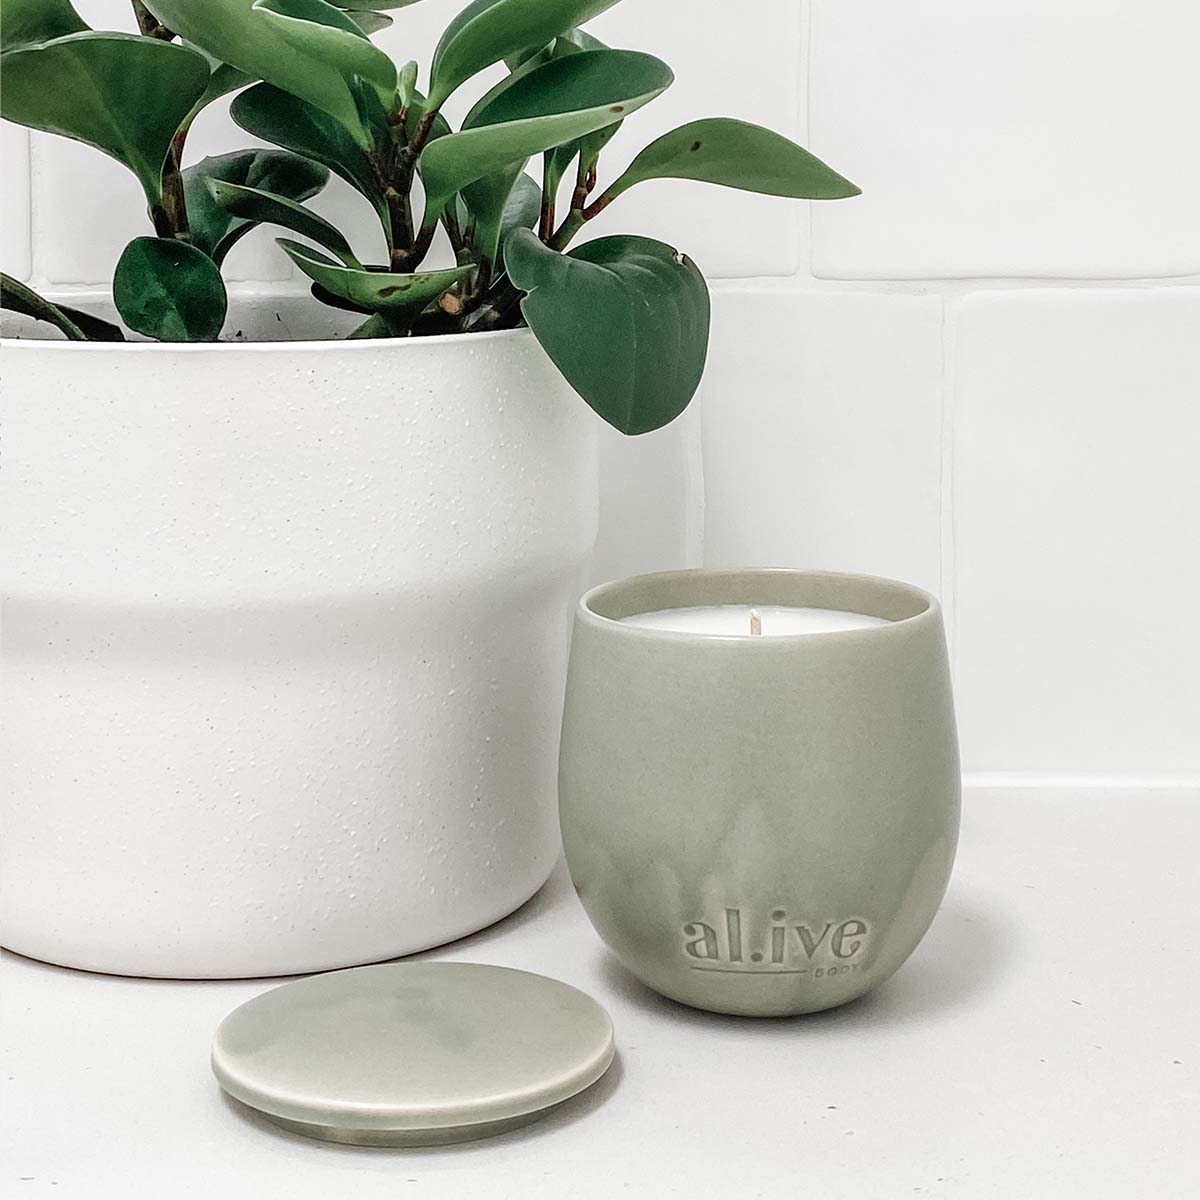 al.ive body | Soy Candle (Assorted Fragrances)